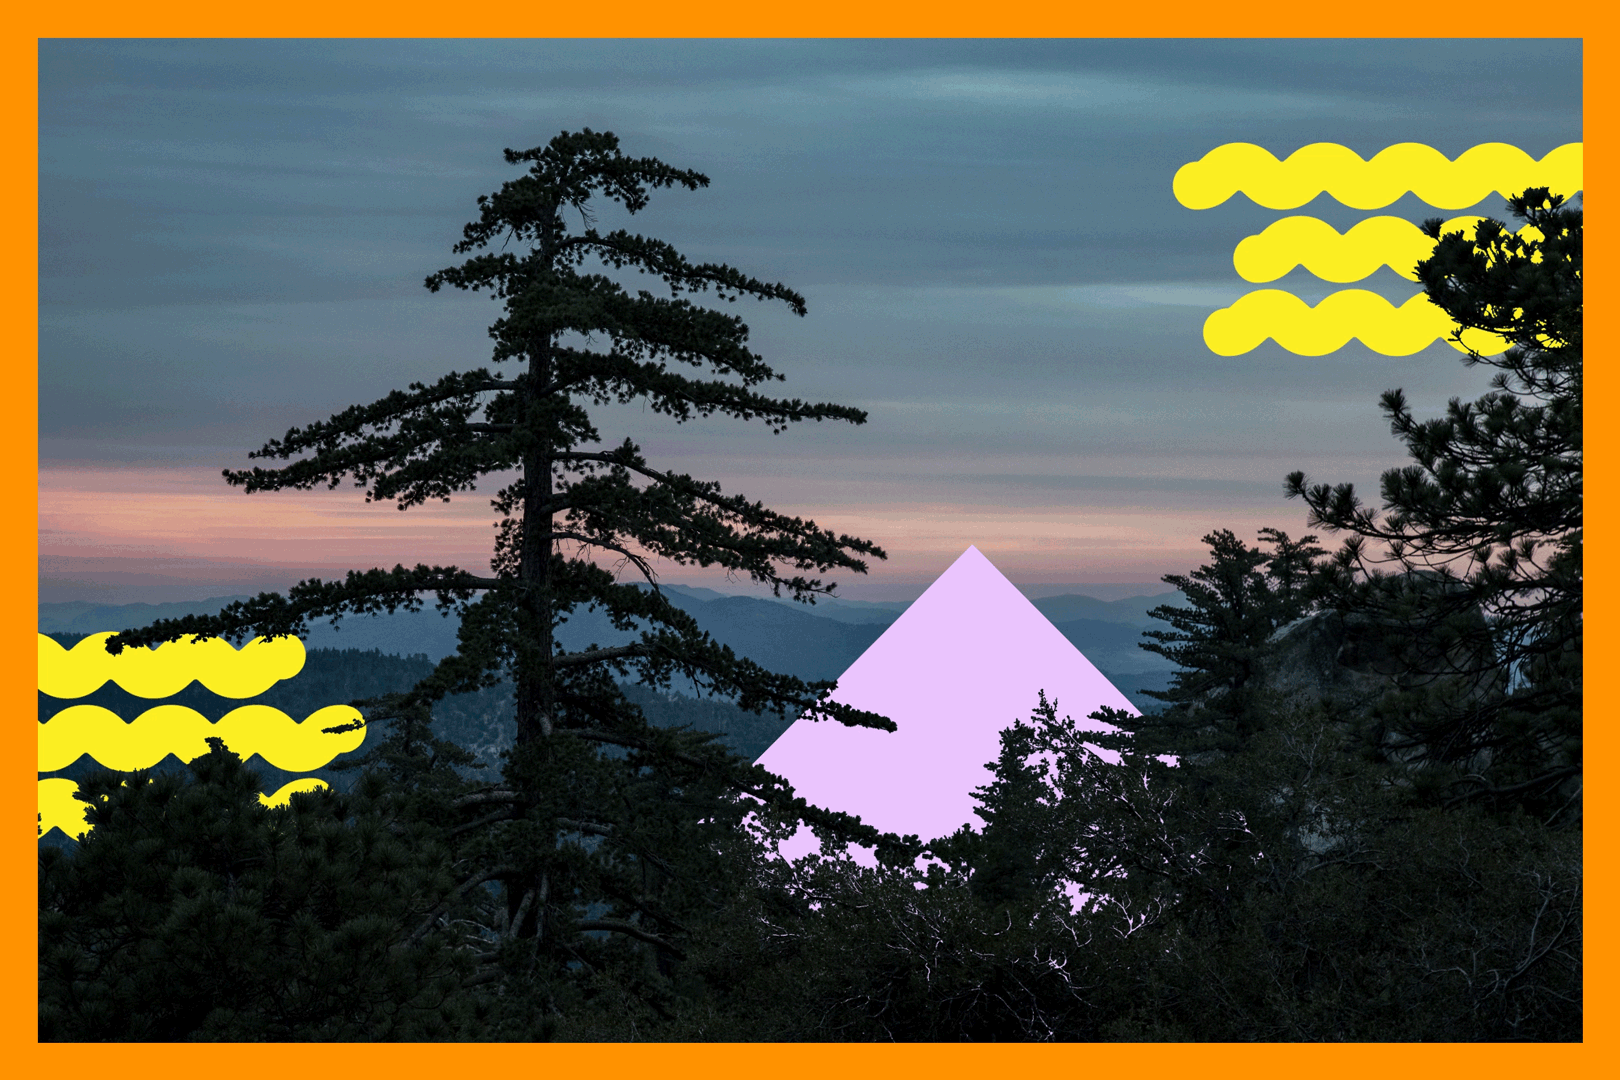 A pine tree in silhouette in the foreground with the sun setting behind the mountains in the background